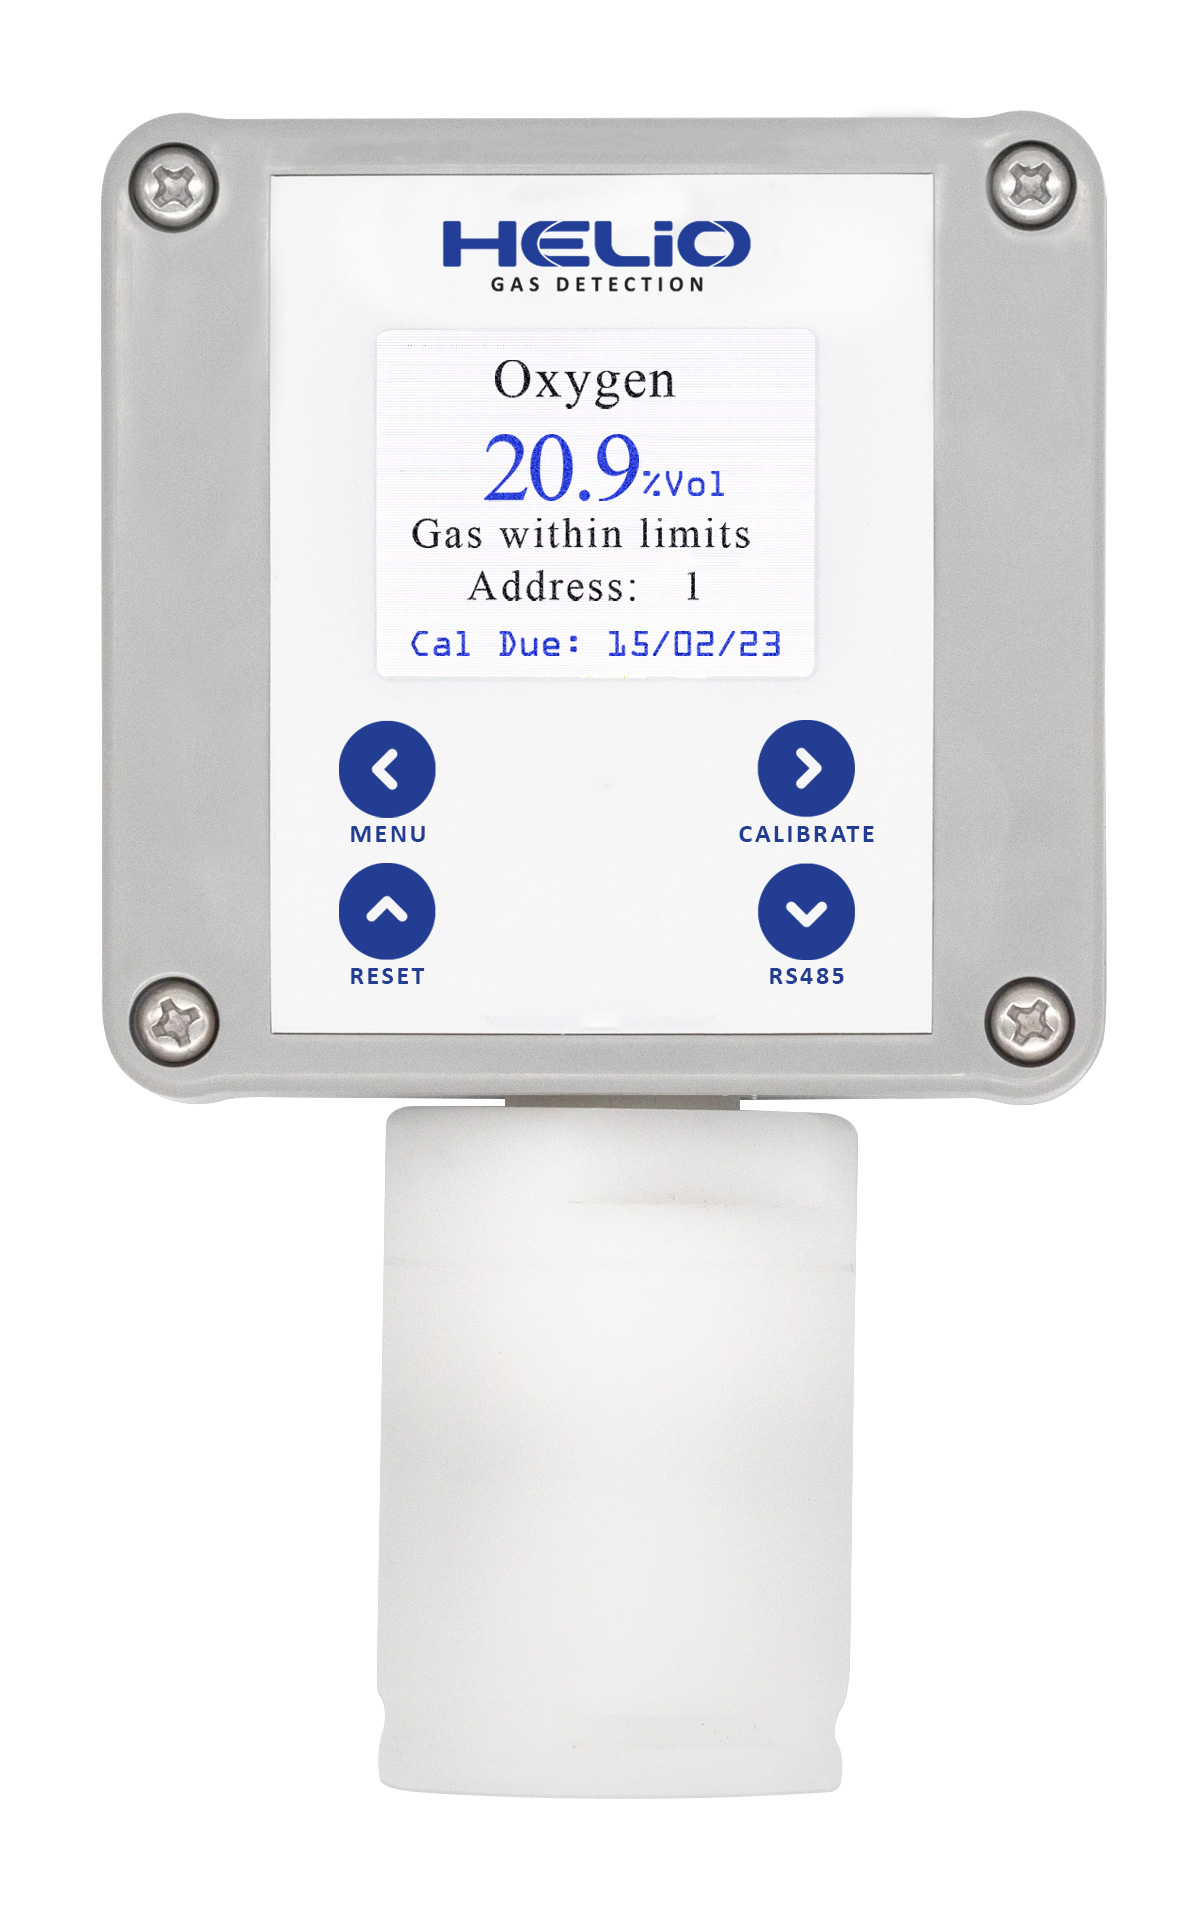 Helio Gas Detection provides an industrial standalone gas detector, with a multi-gas display panel.